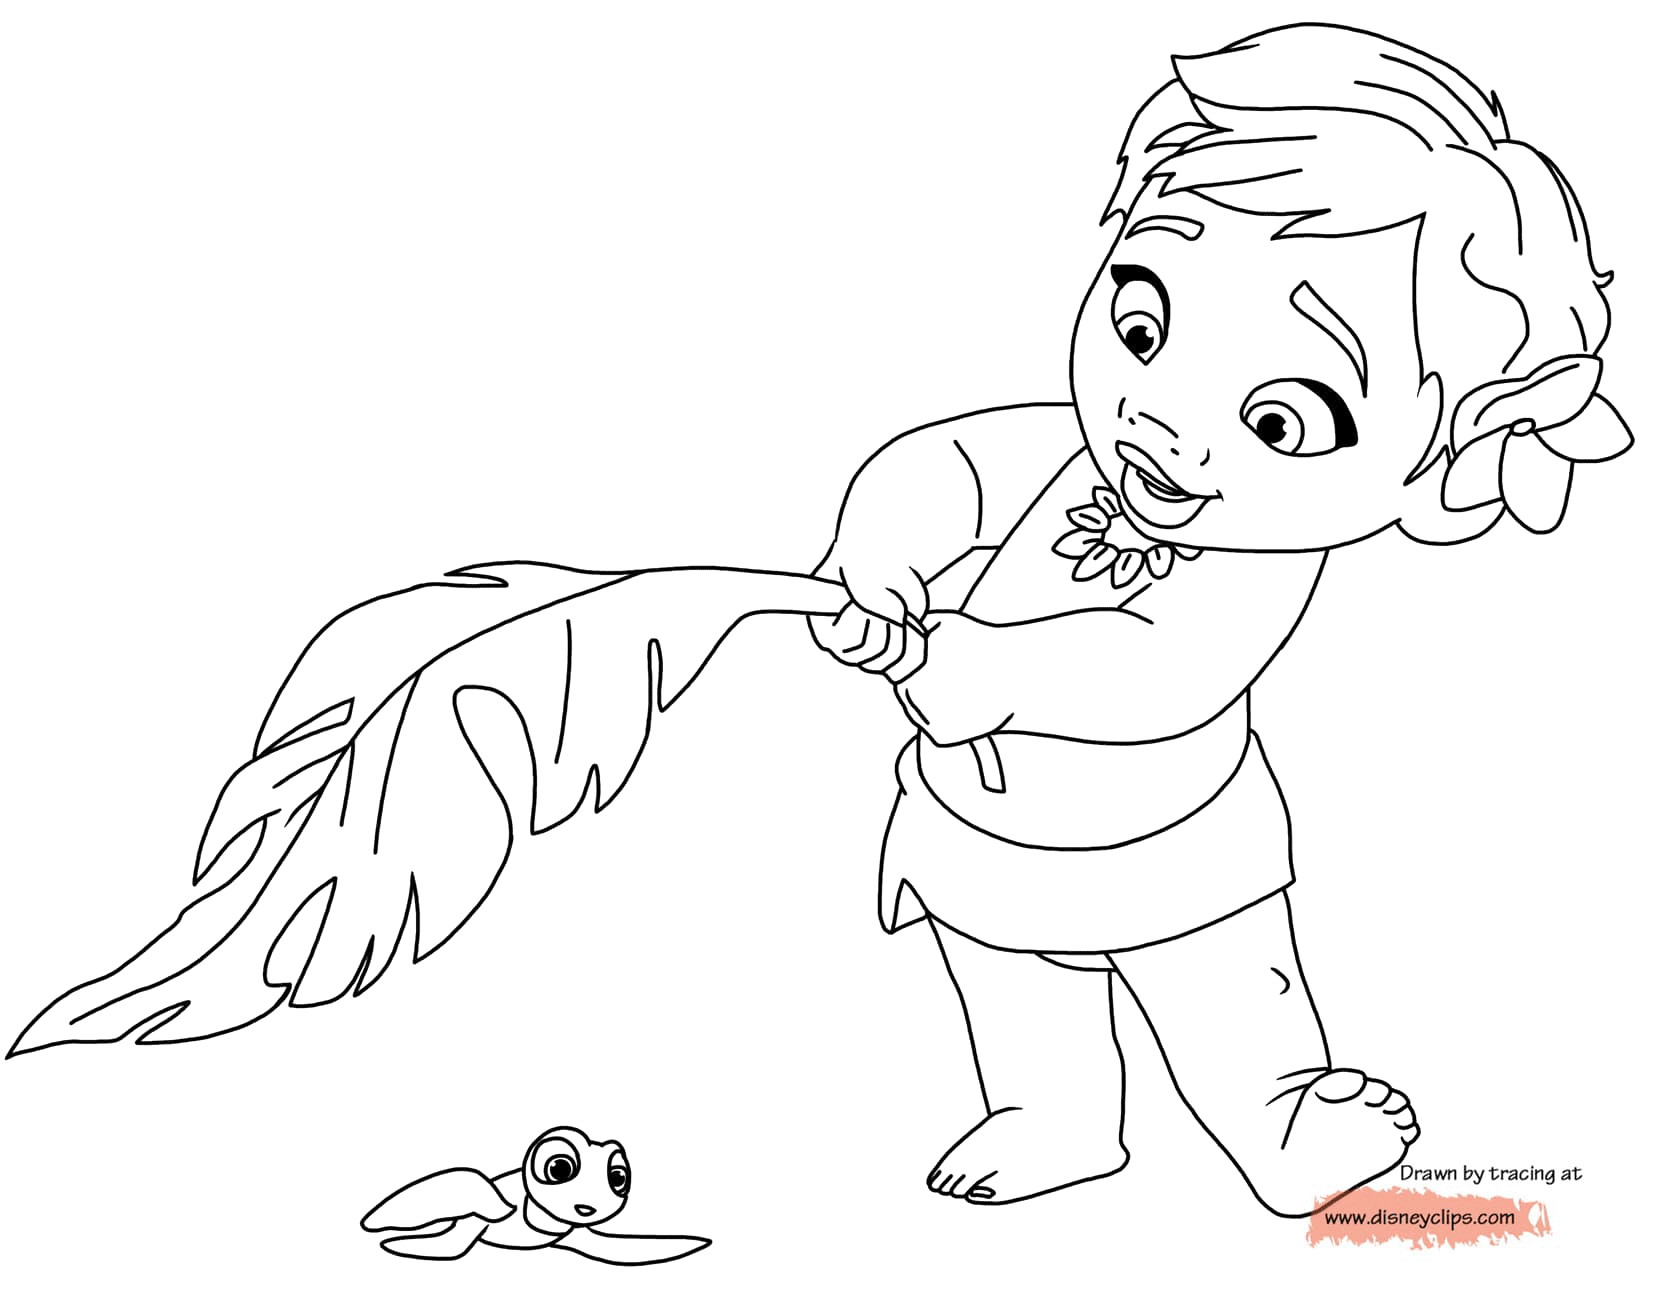 Disney39s Moana Coloring Pages Disneyclipscom